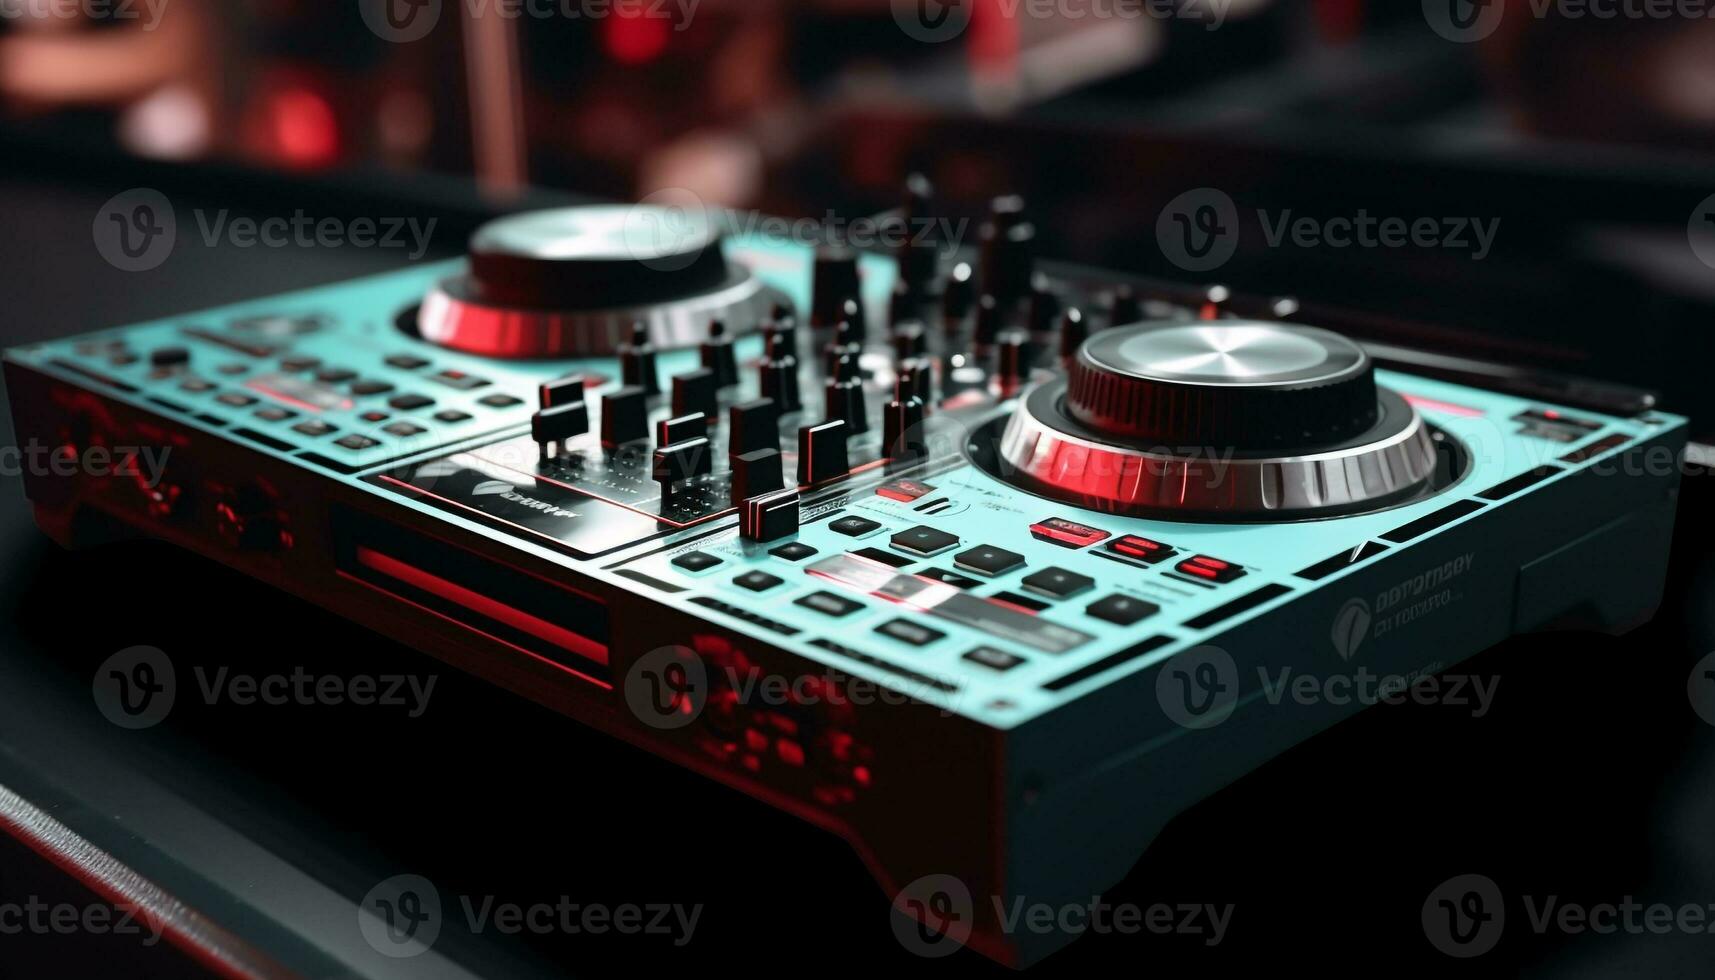 AI generated Nightclub turntable mixing equipment creates electrifying nightlife atmosphere generated by AI photo